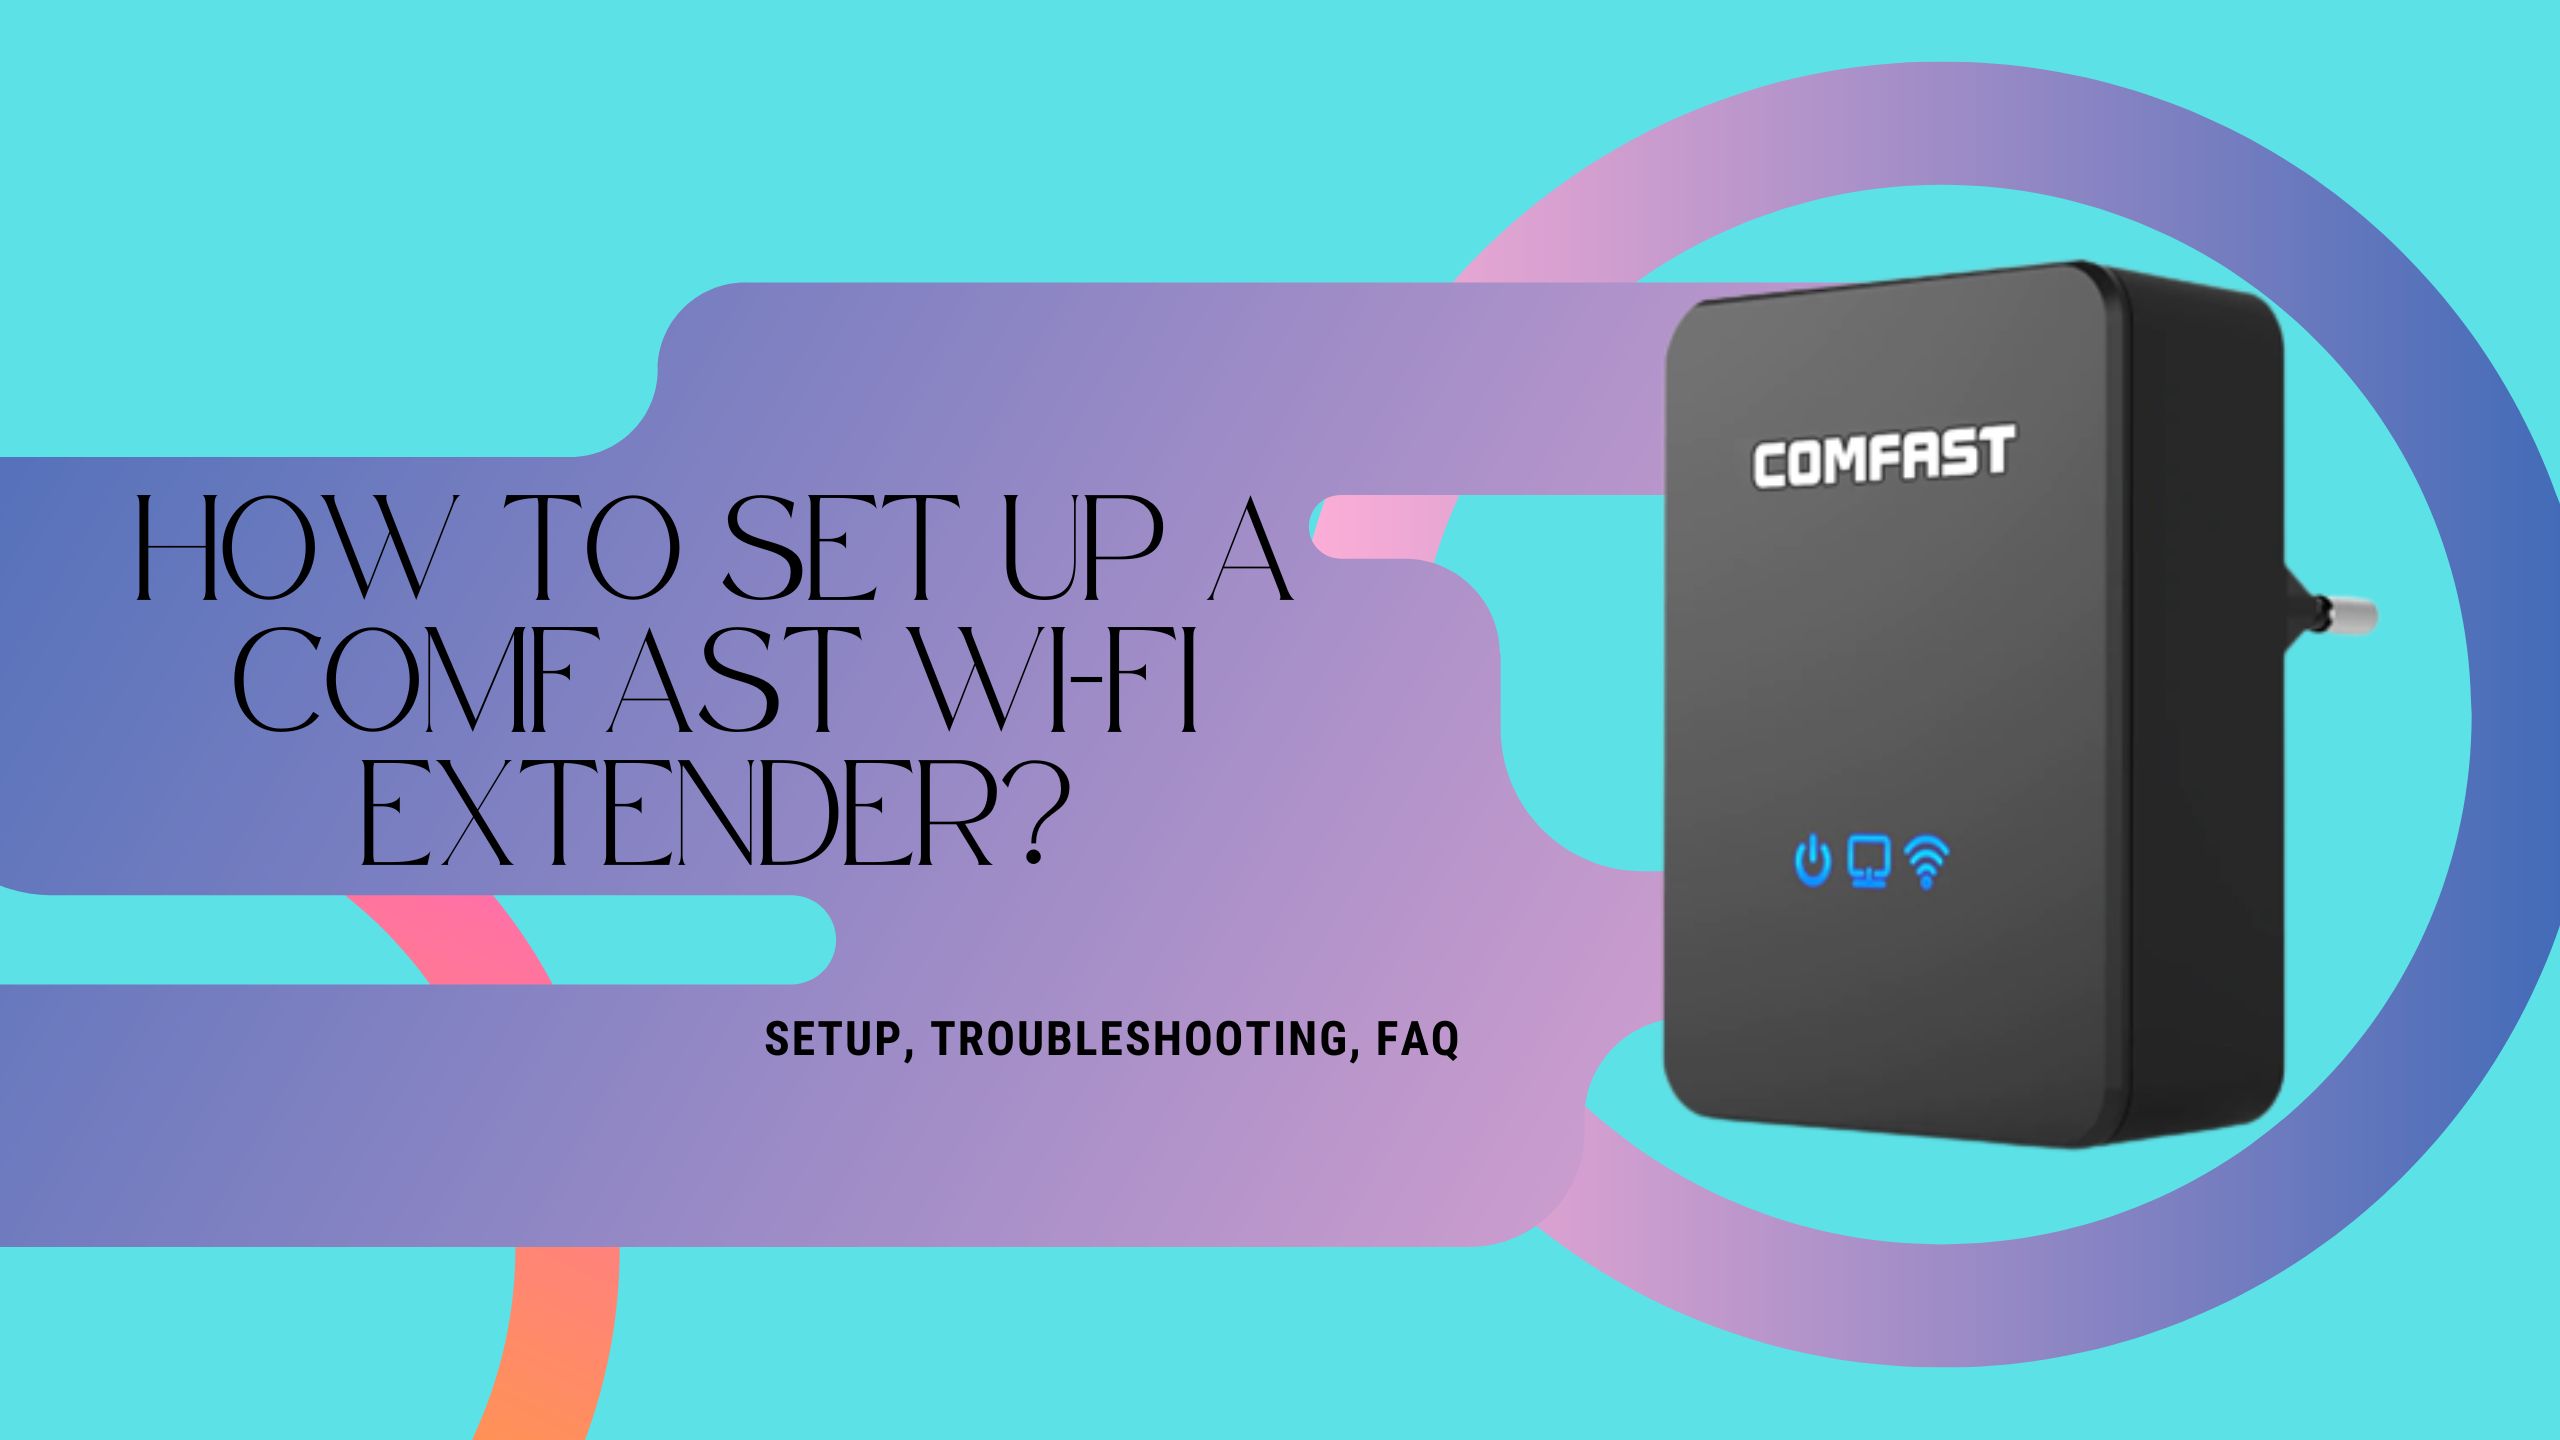 HOW TO SET UP A COMFAST WI-FI EXTENDER?